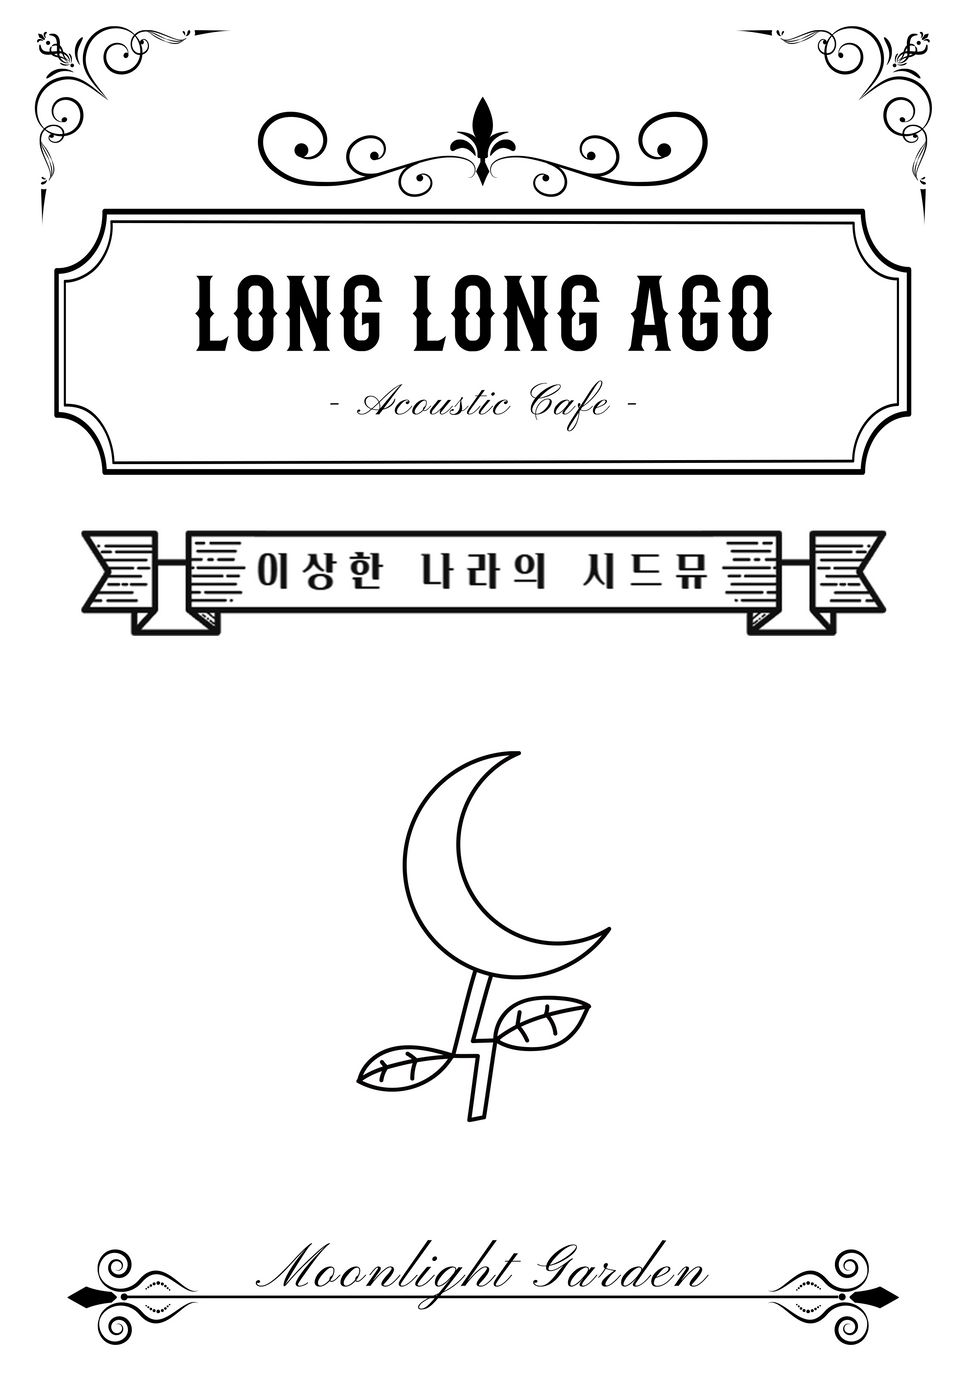 Acoustic Cafe - Long Long Ago by Moonlight garden